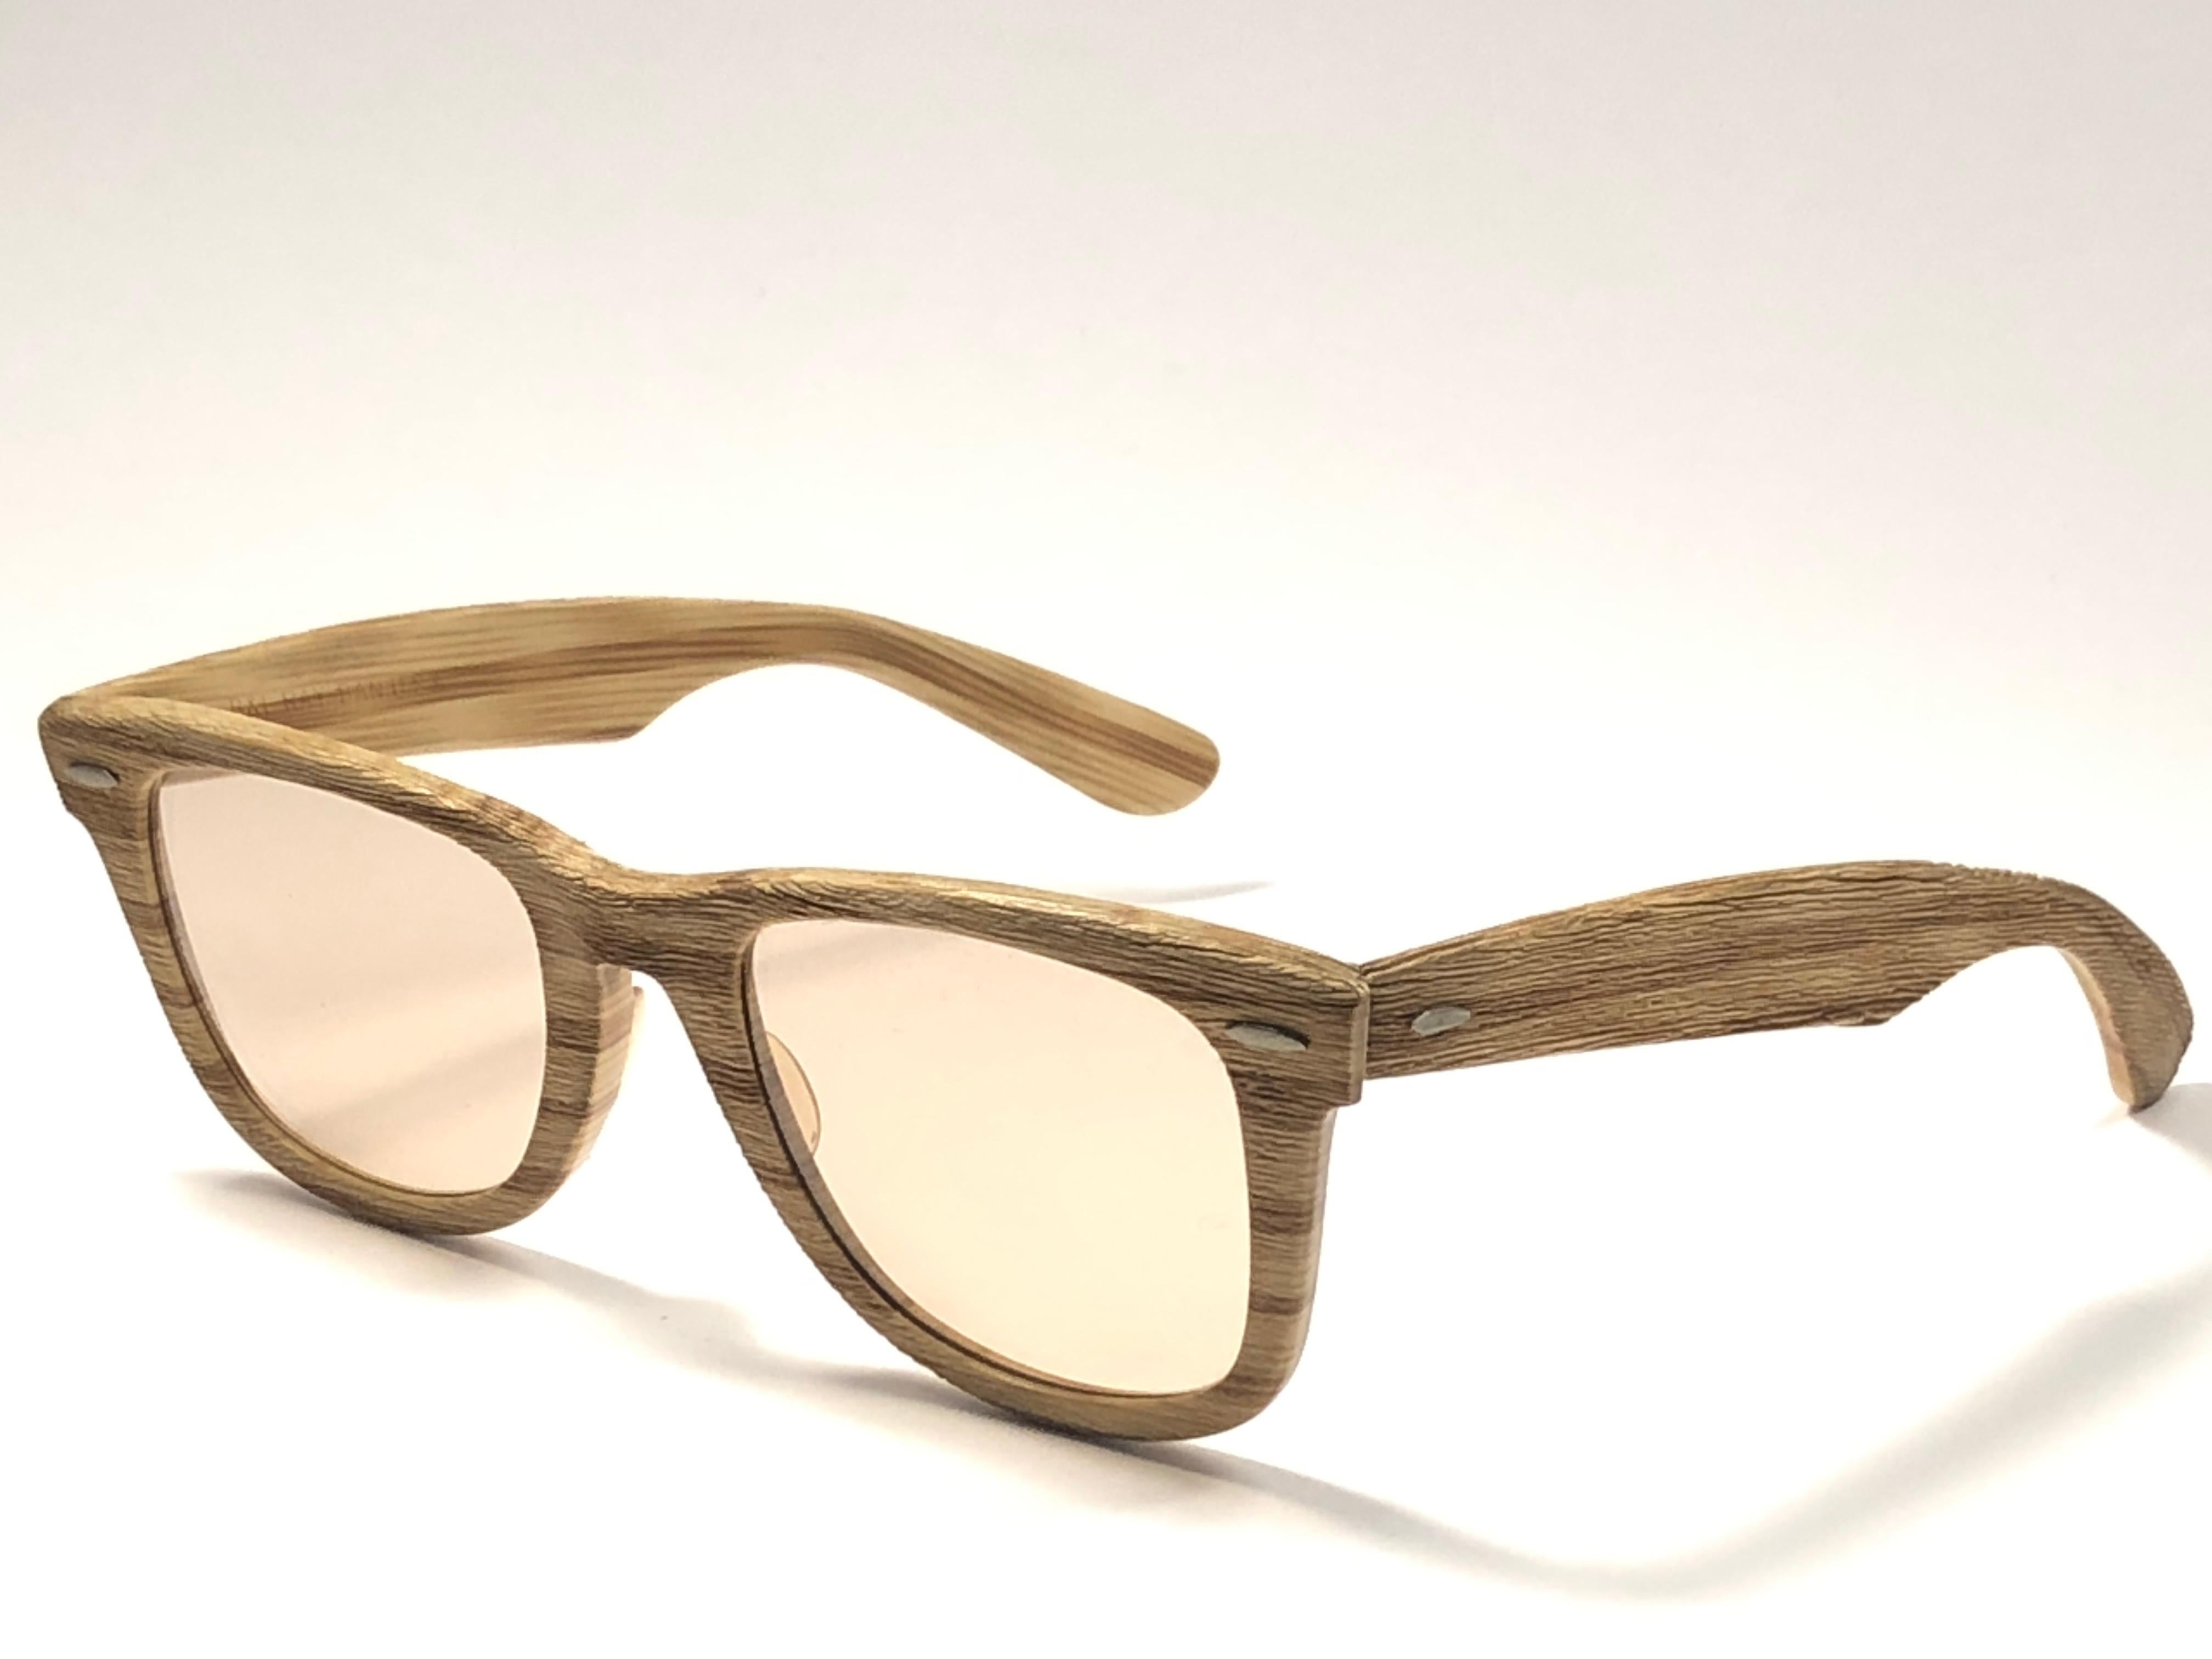 New Ray Ban The Wayfarer Woodies Driftwood Edition Collectors USA 80 Sunglasses In New Condition For Sale In Baleares, Baleares